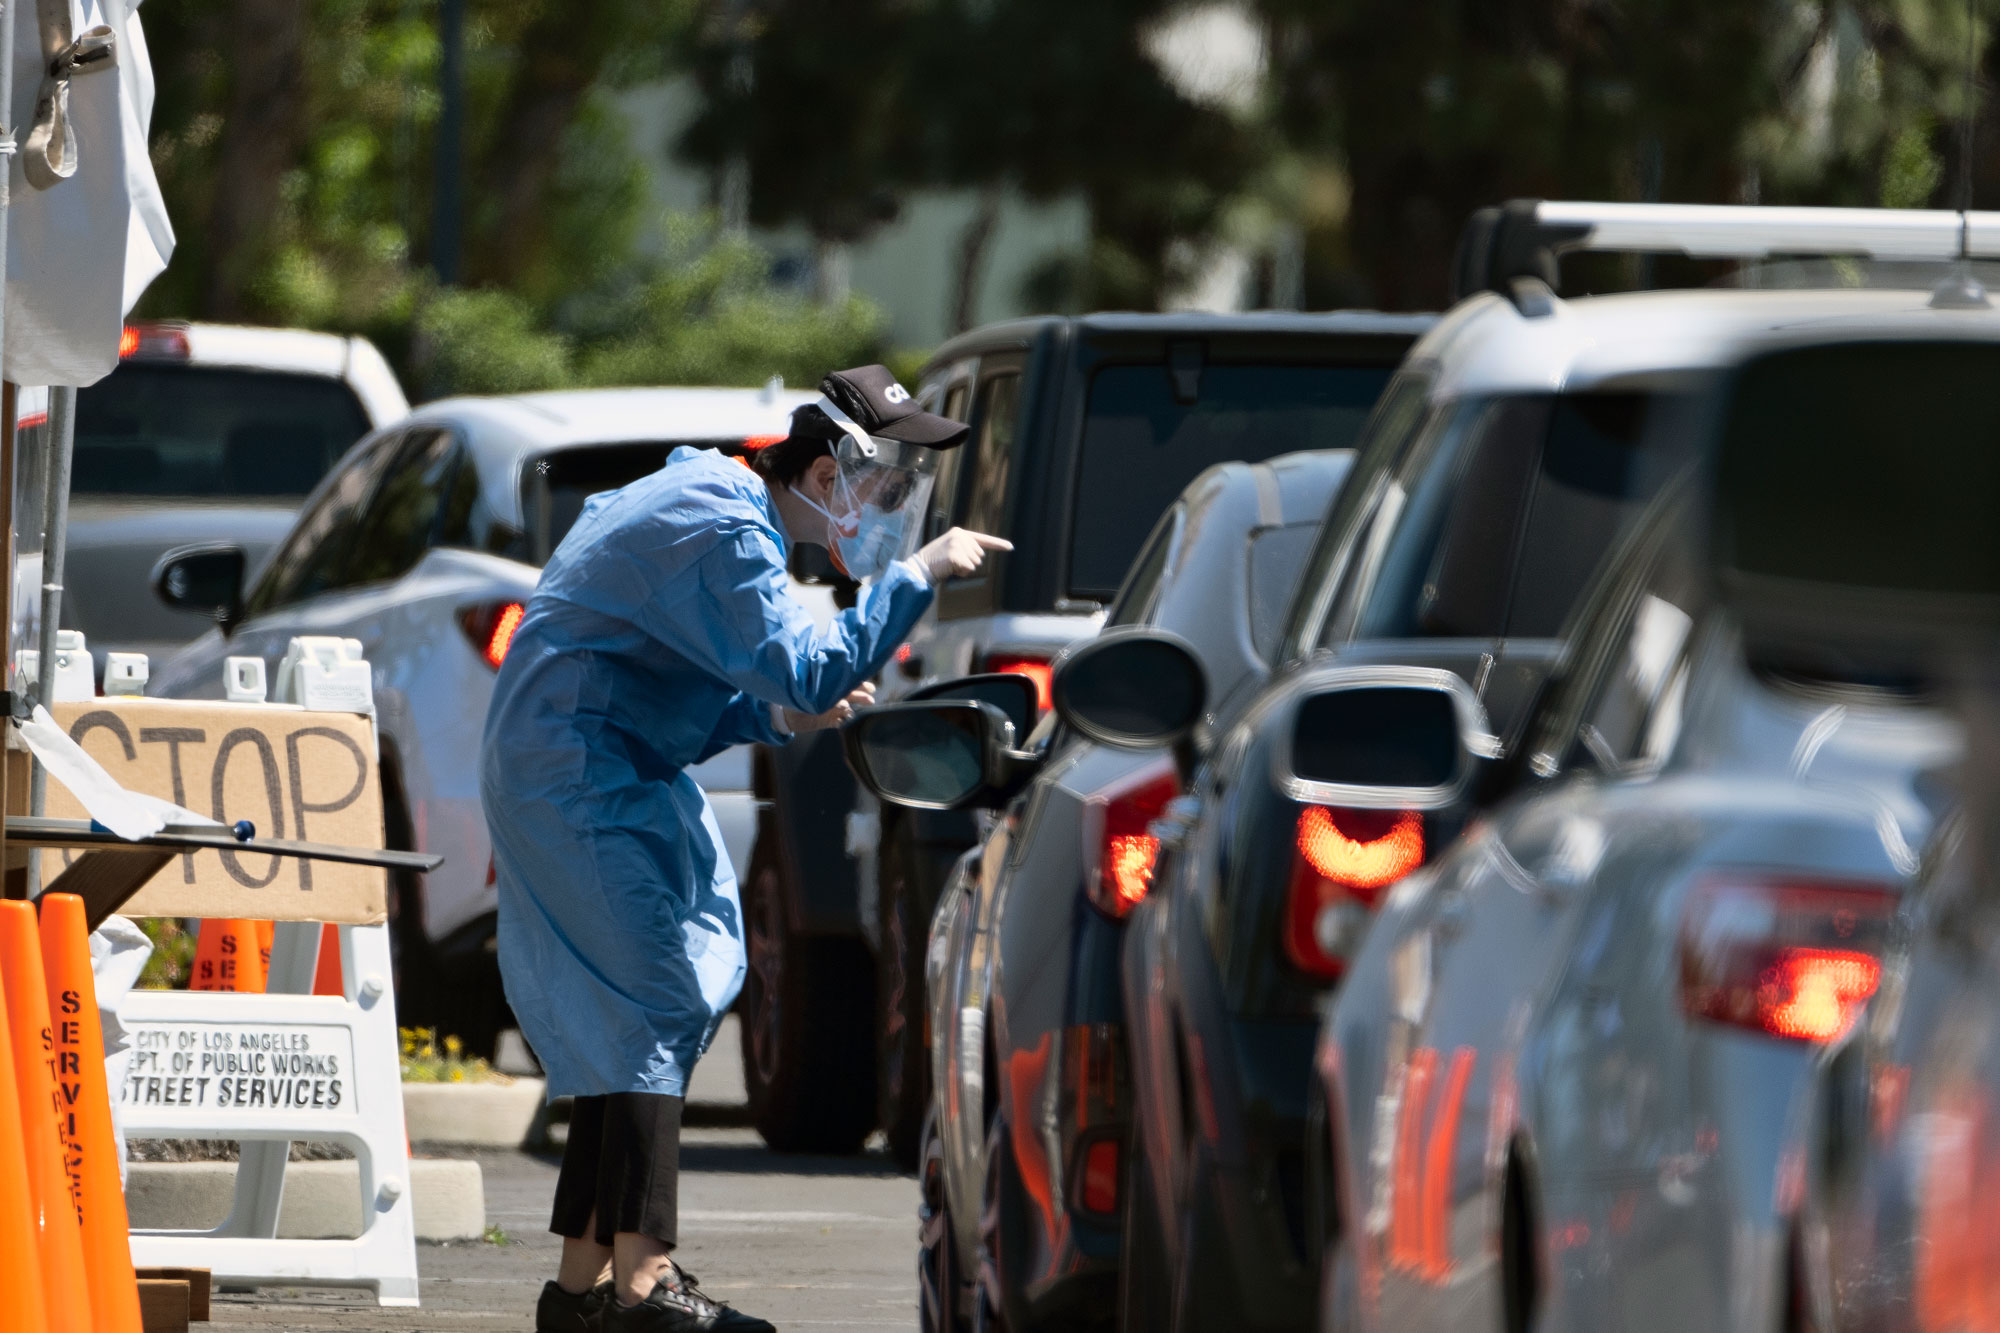 A  Community Organized Relief Effort volunteer directs cars lining up for coronavirus testing in Los Angeles on May 2.